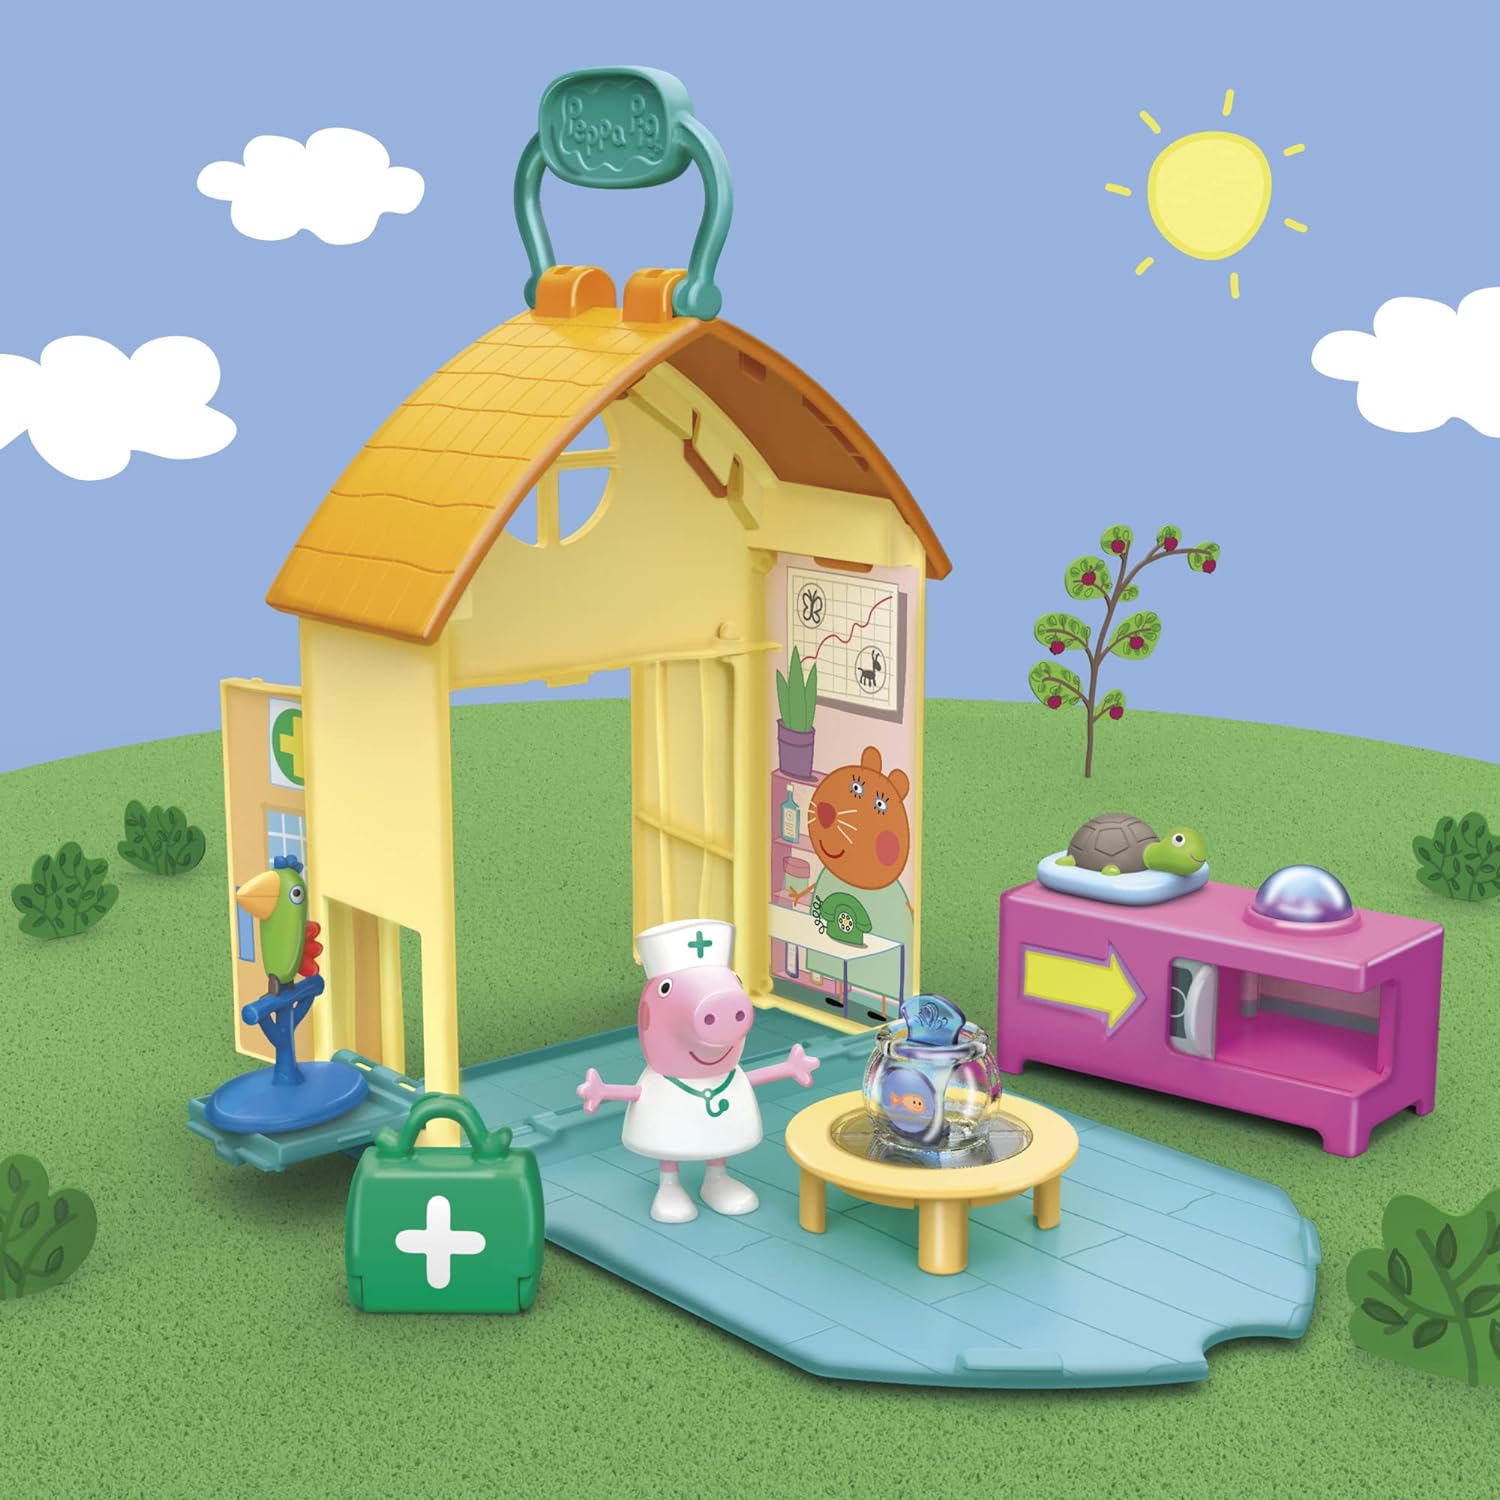 Hasbro Peppa Pig Peppa’s Adventures Peppa Visits The Vet Playset Preschool Toy, 1 Figure and 3 Accessories, Ages 3 and Up Multi…